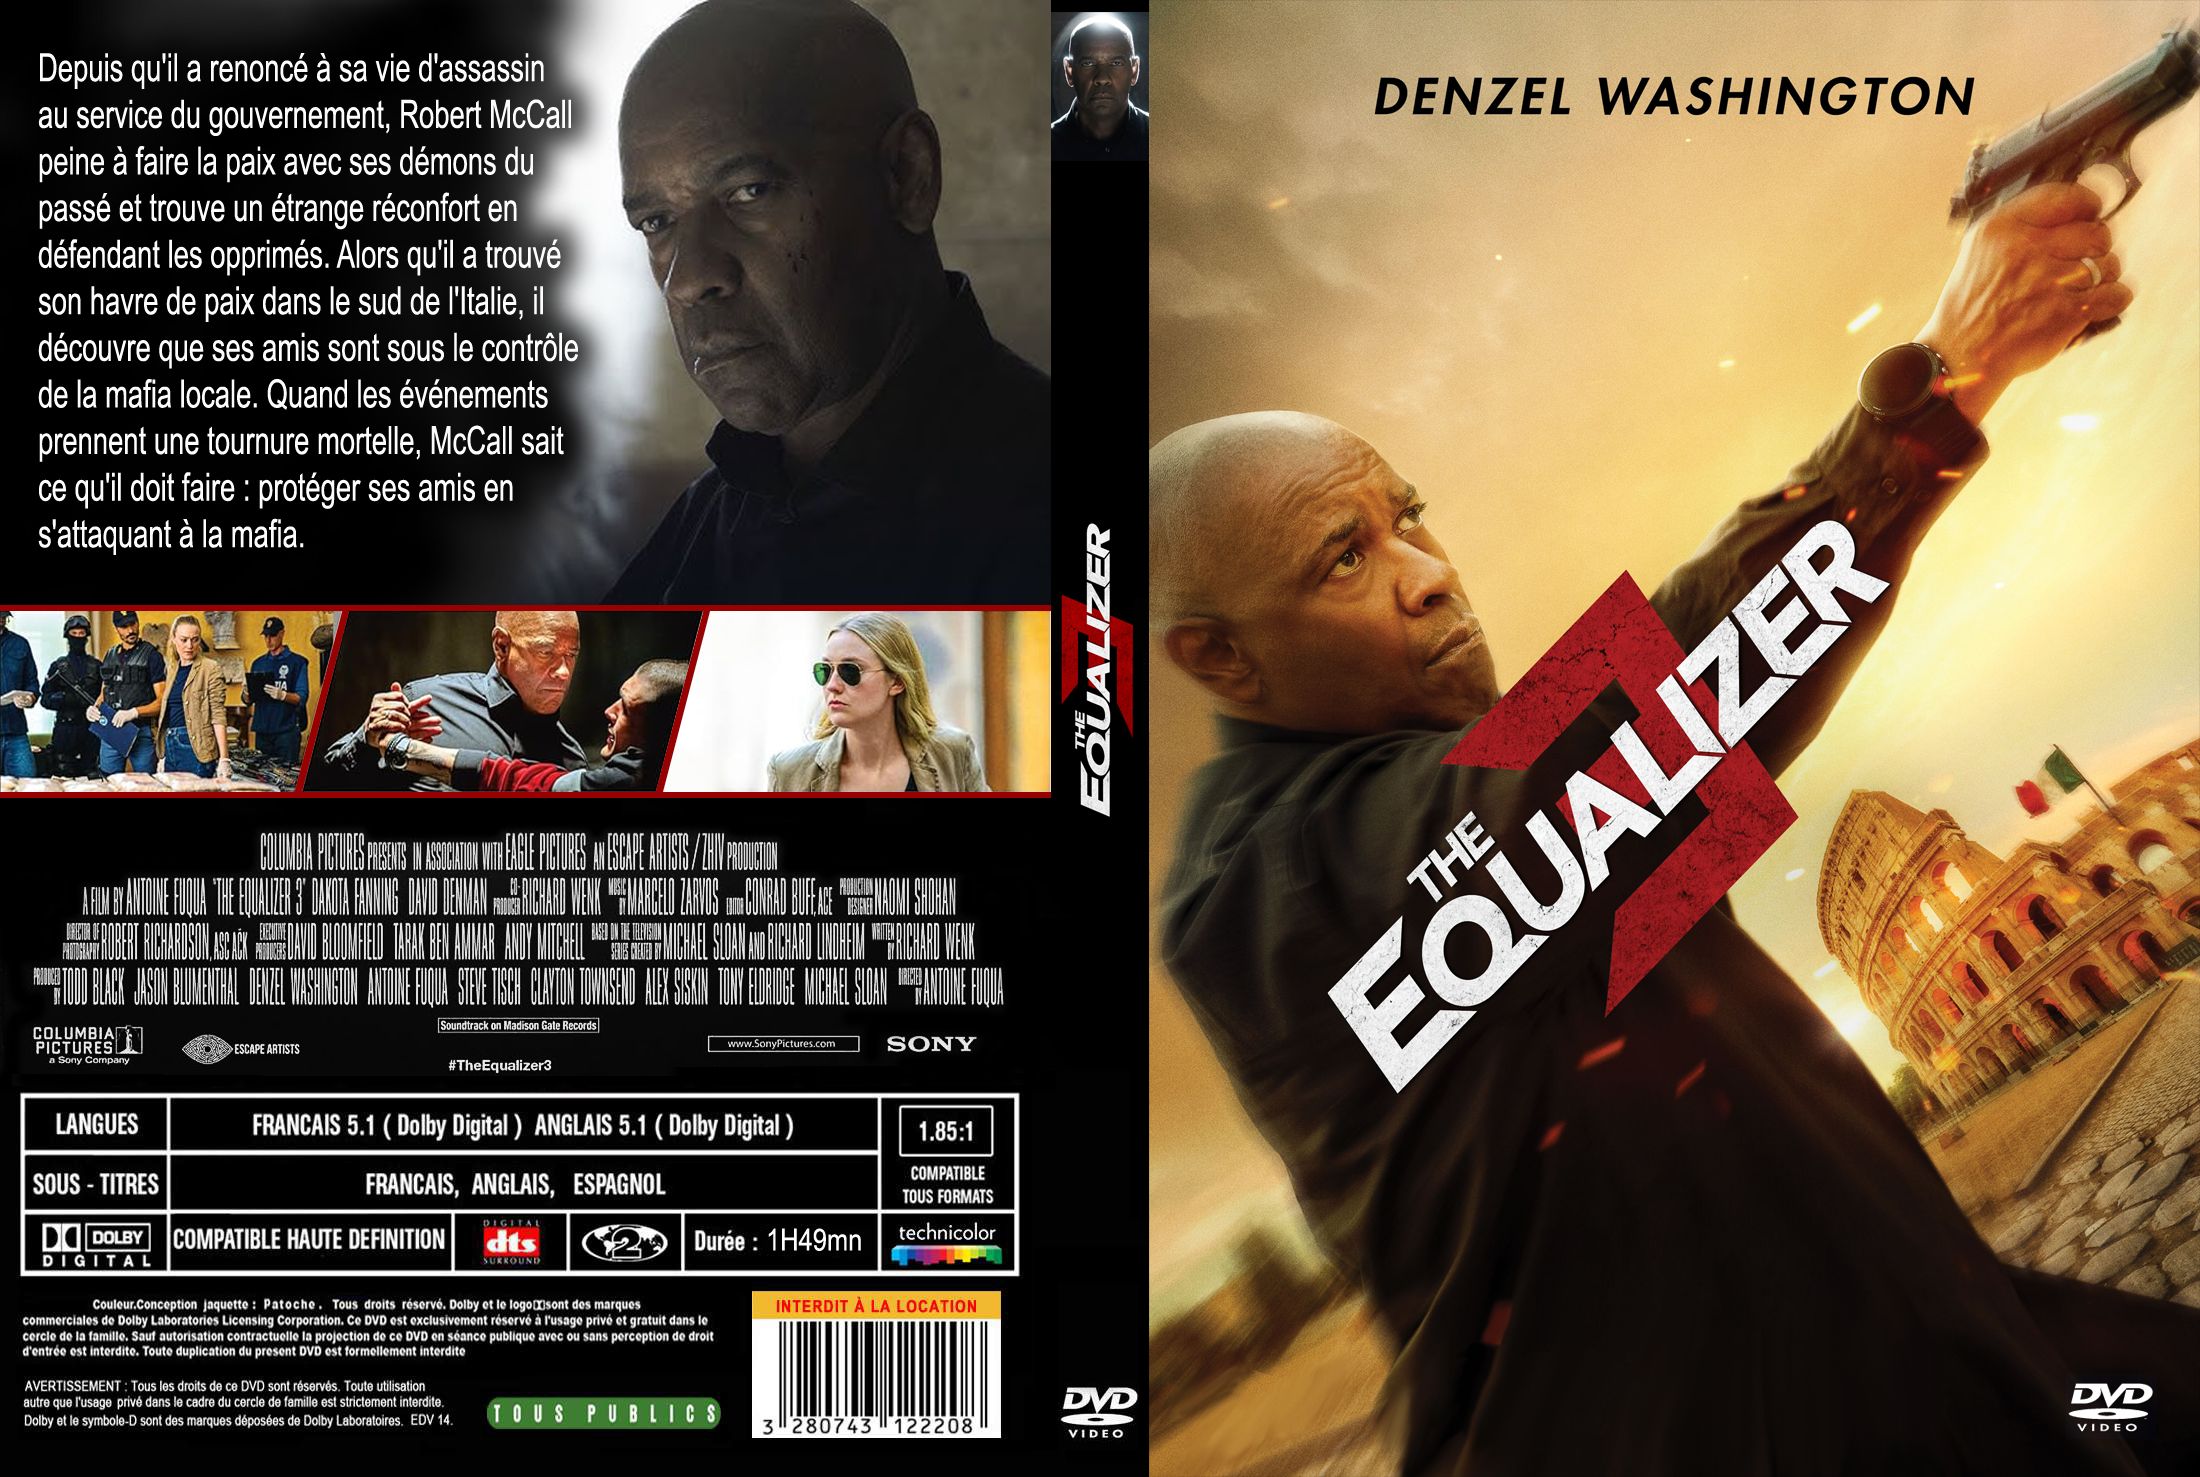 Jaquette DVD The equalizer 3 custom